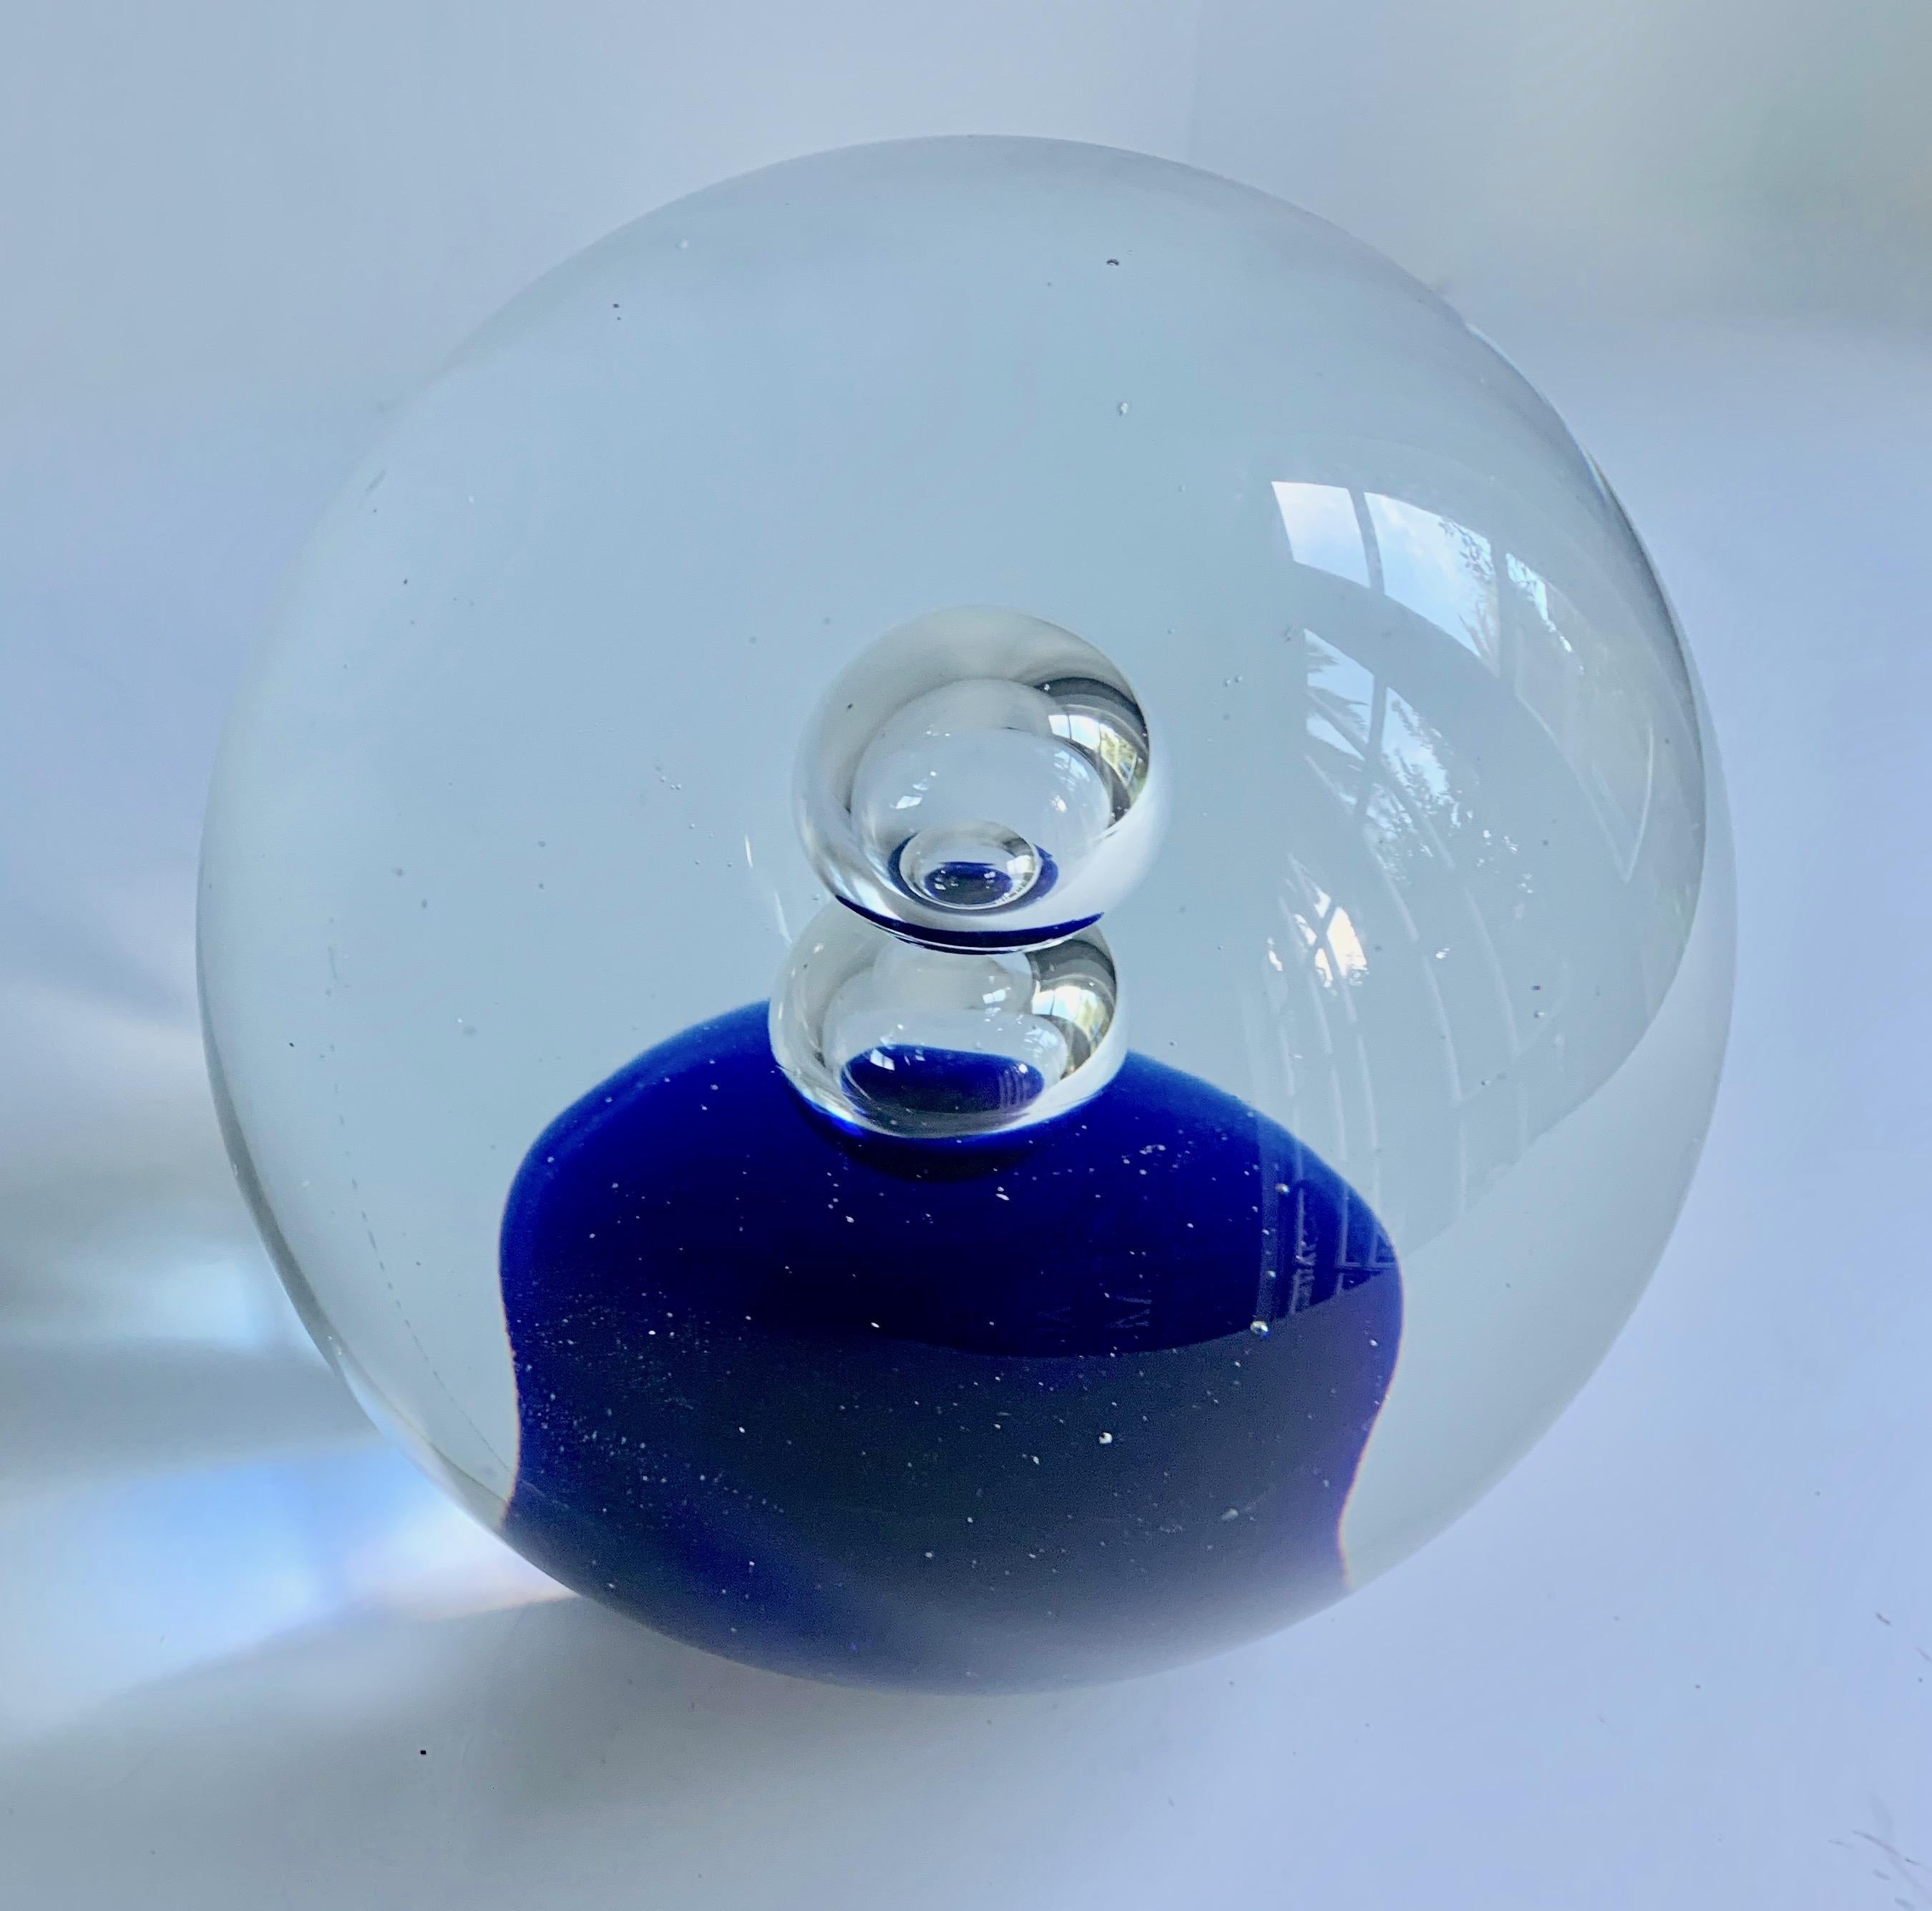 Murano glass blue paperweight - large, simple and decorative.